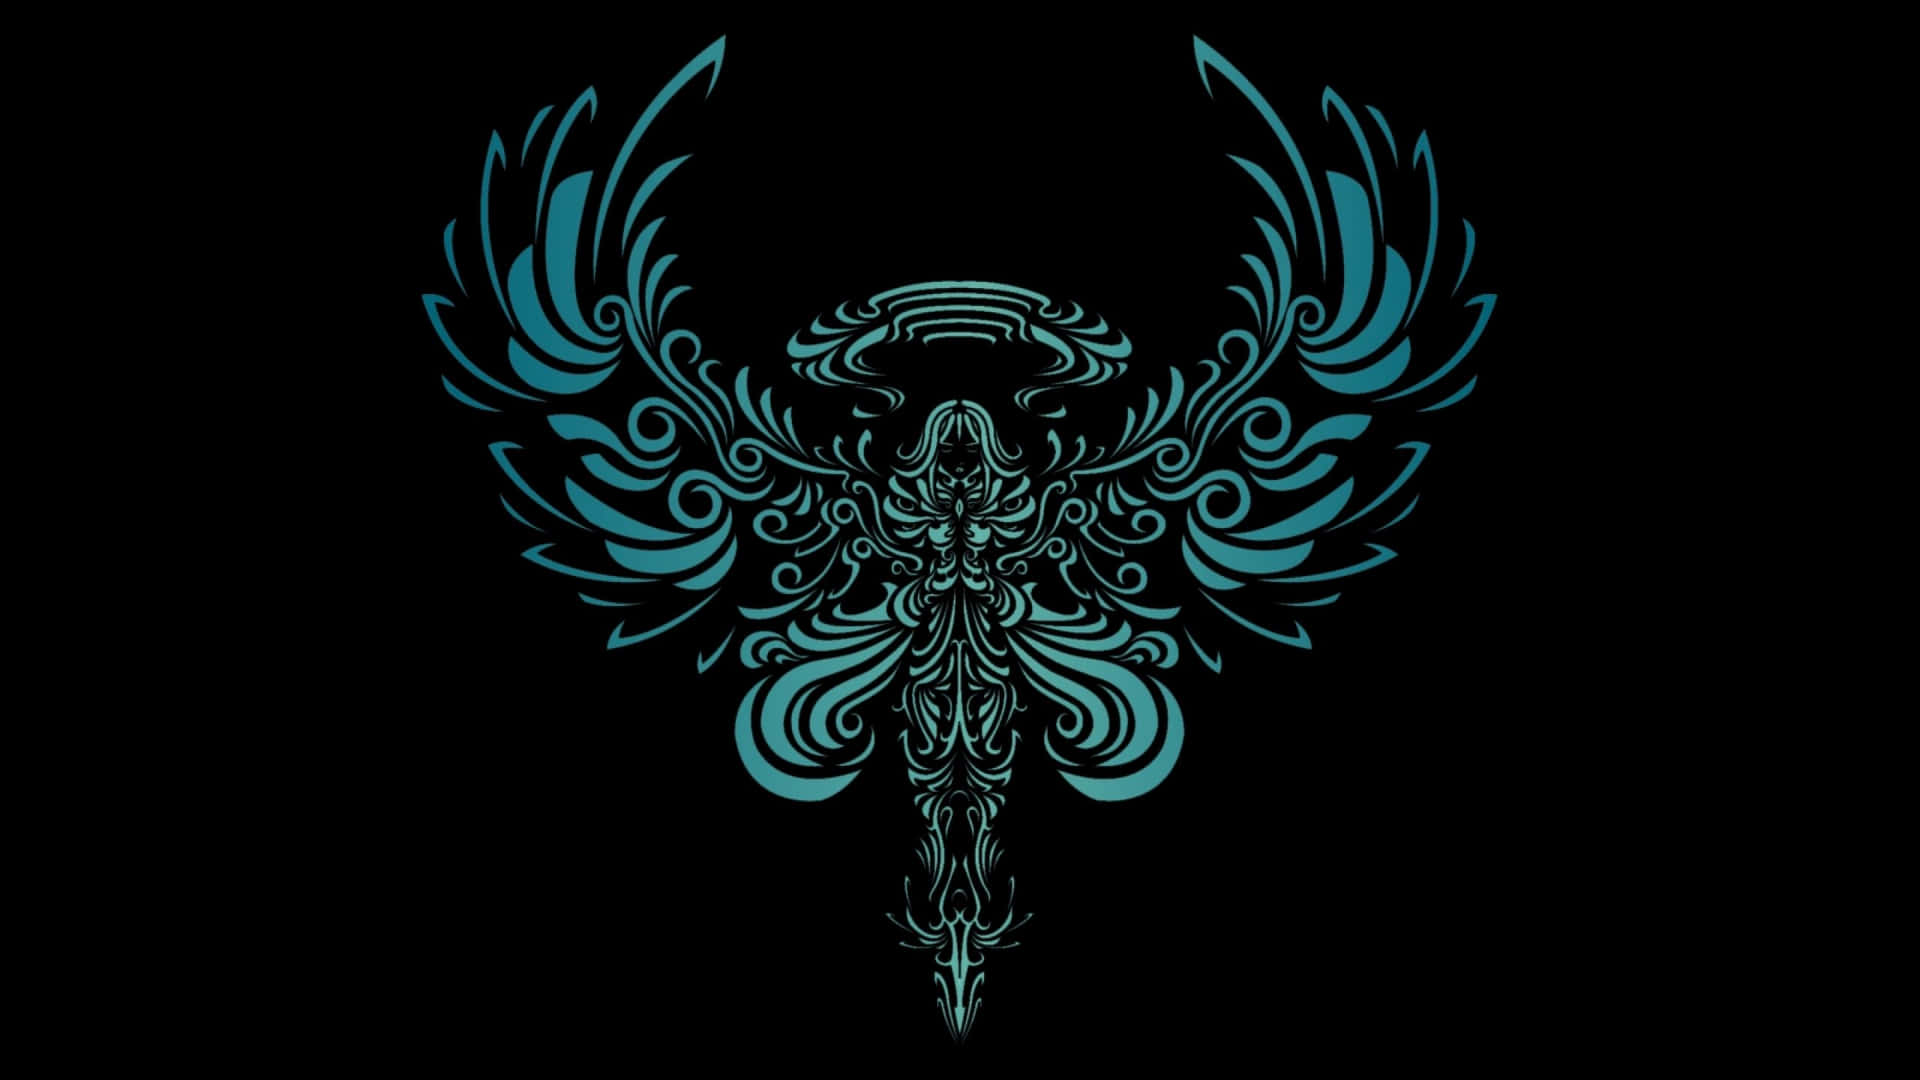 A Blue And Green Dragon With Wings On A Black Background